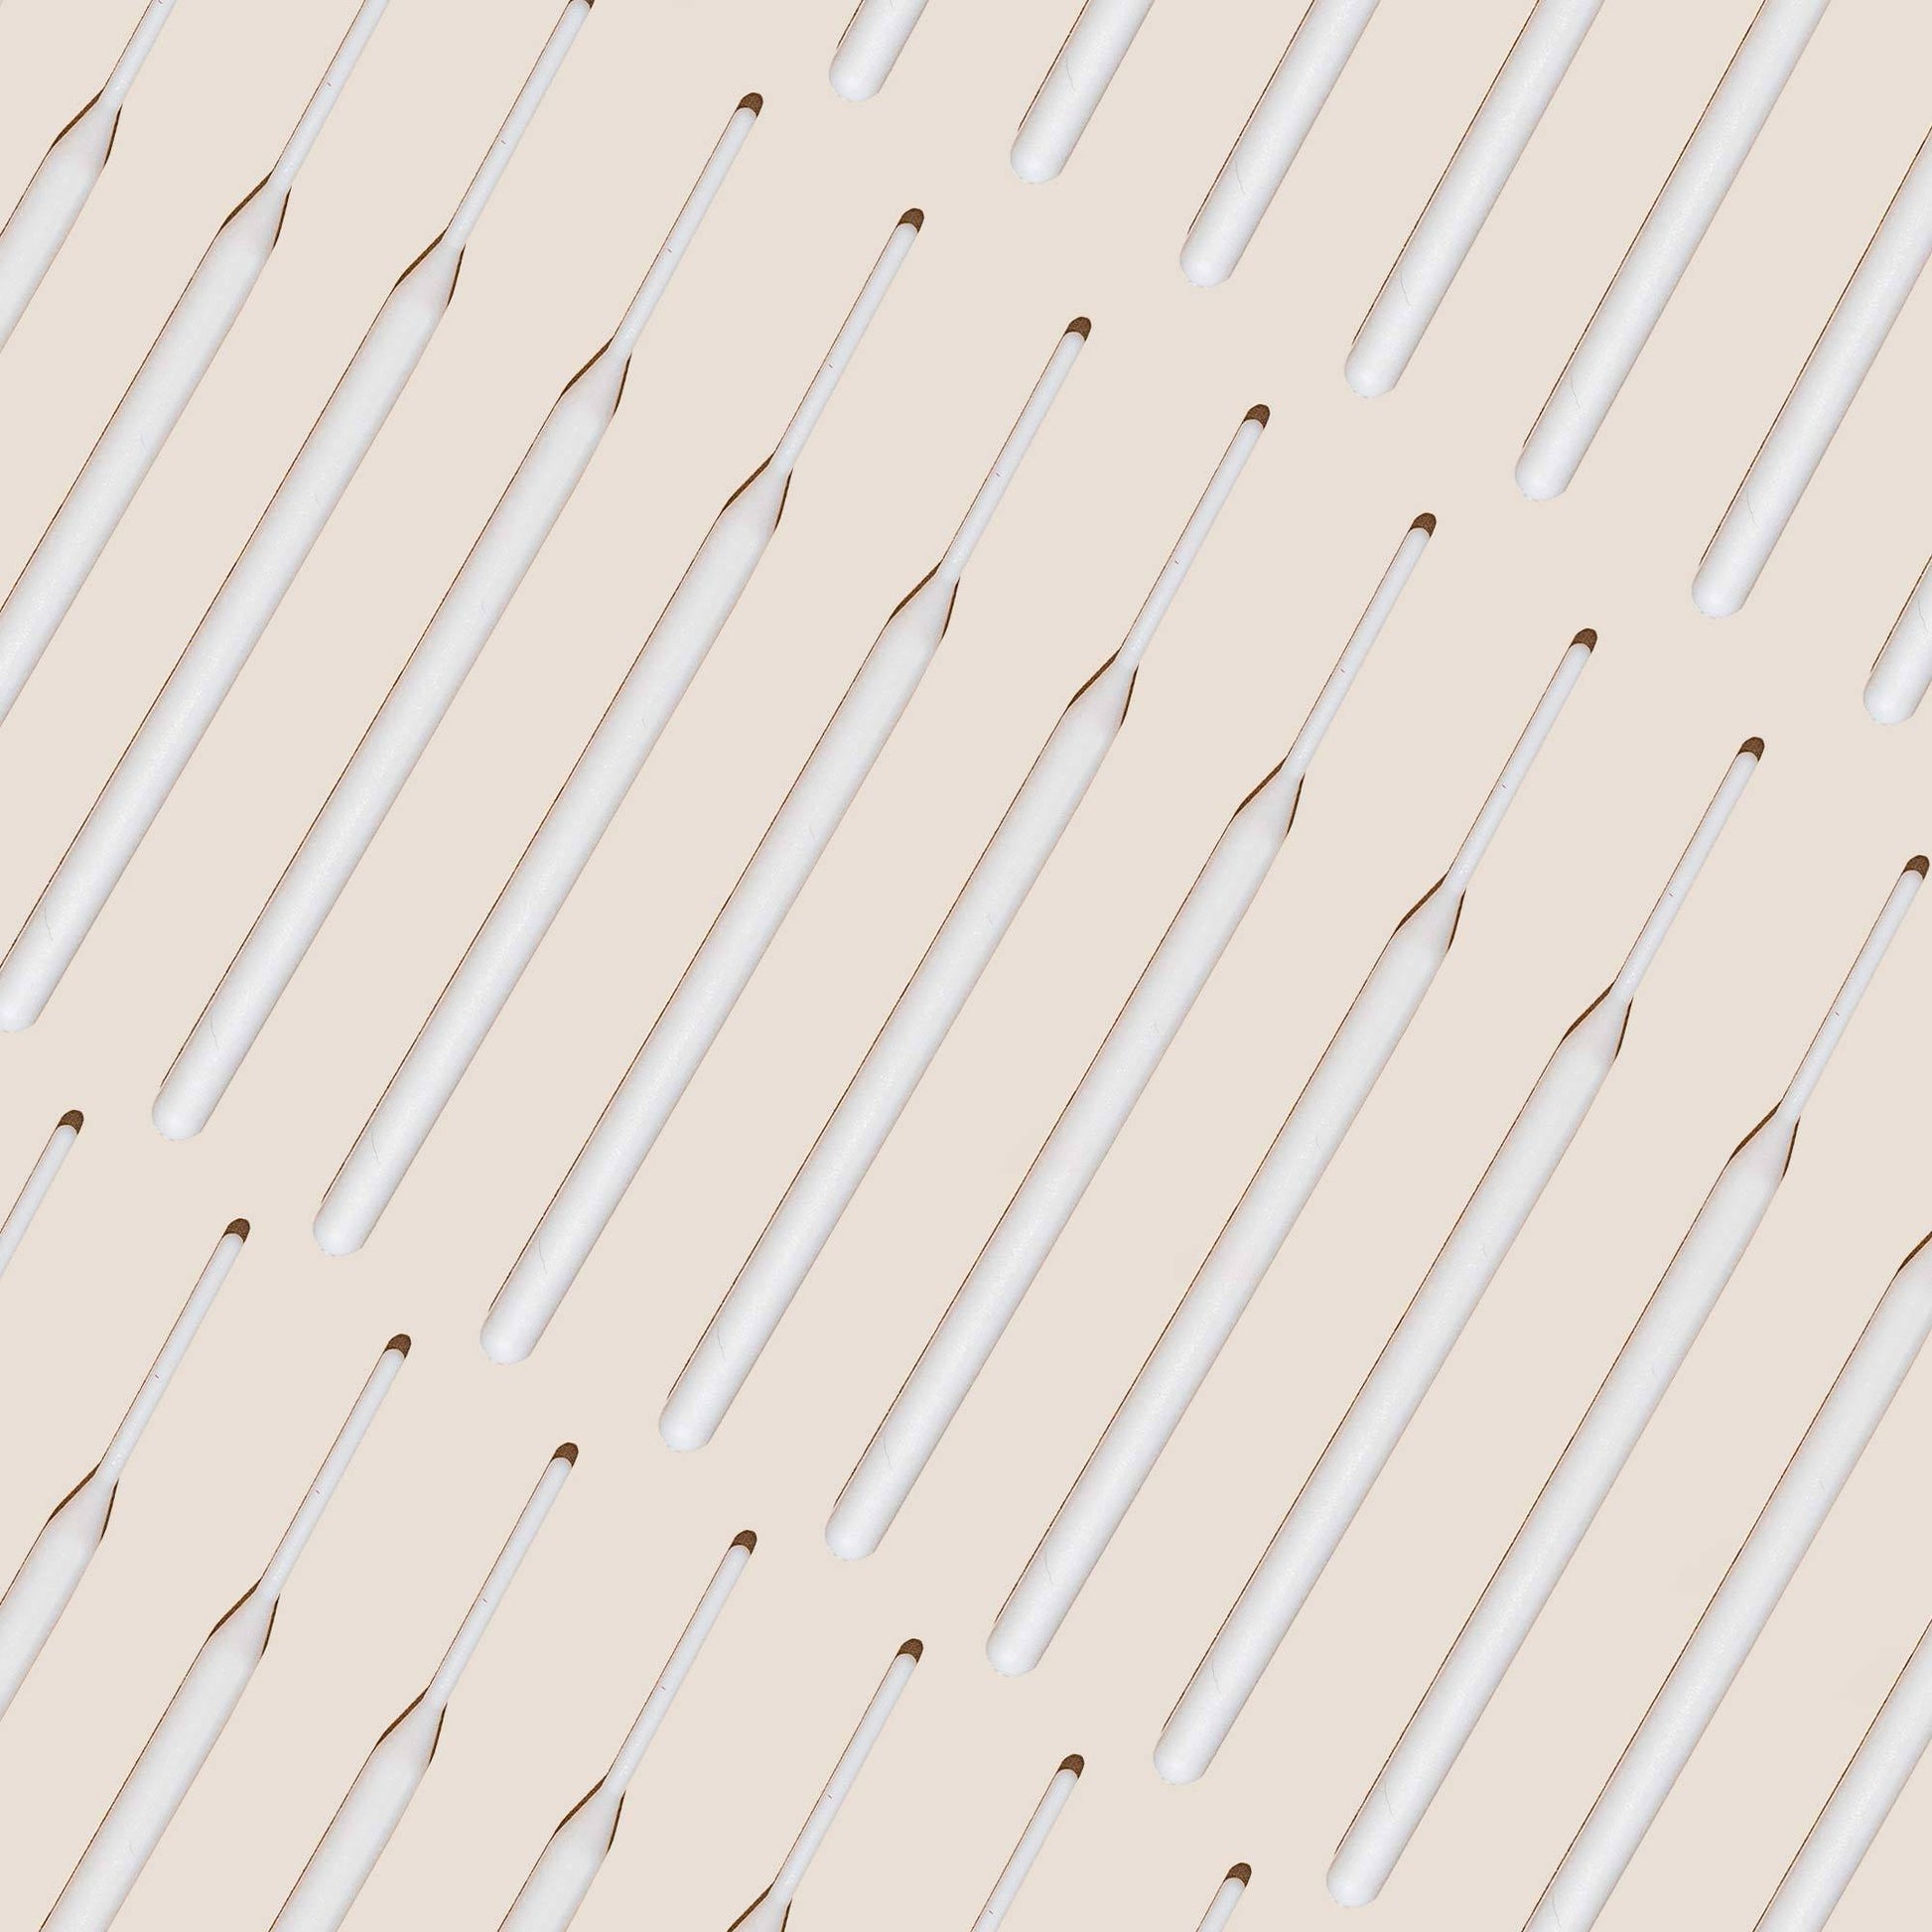 Numerous tinting sticks laid out against an off white background